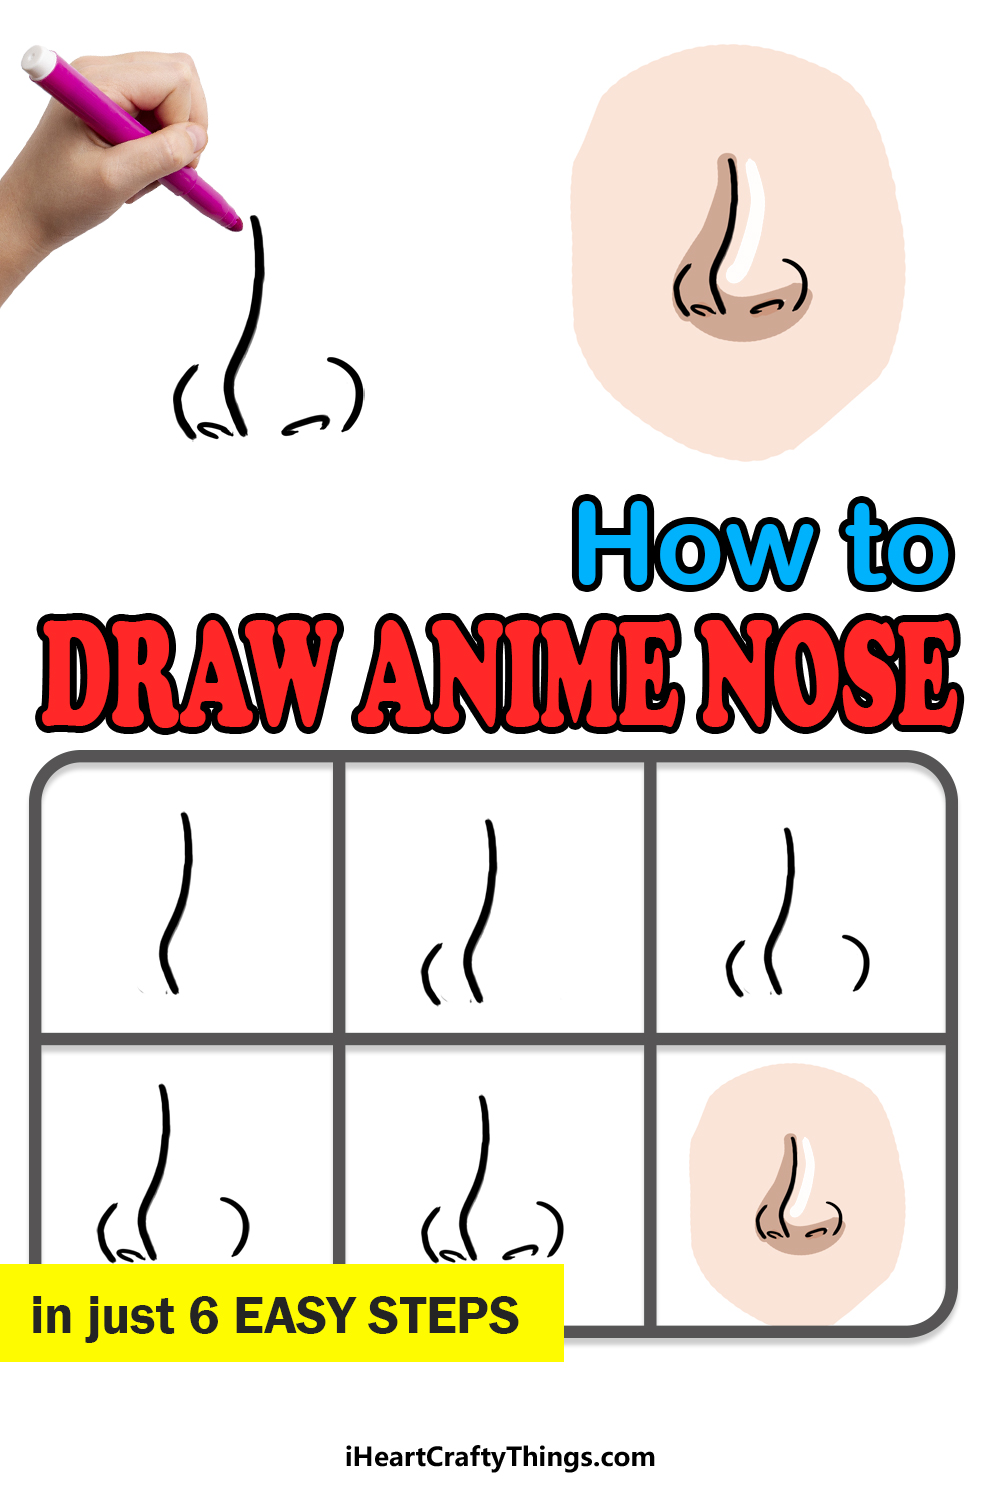 How to Draw An Anime Nose step by step guide